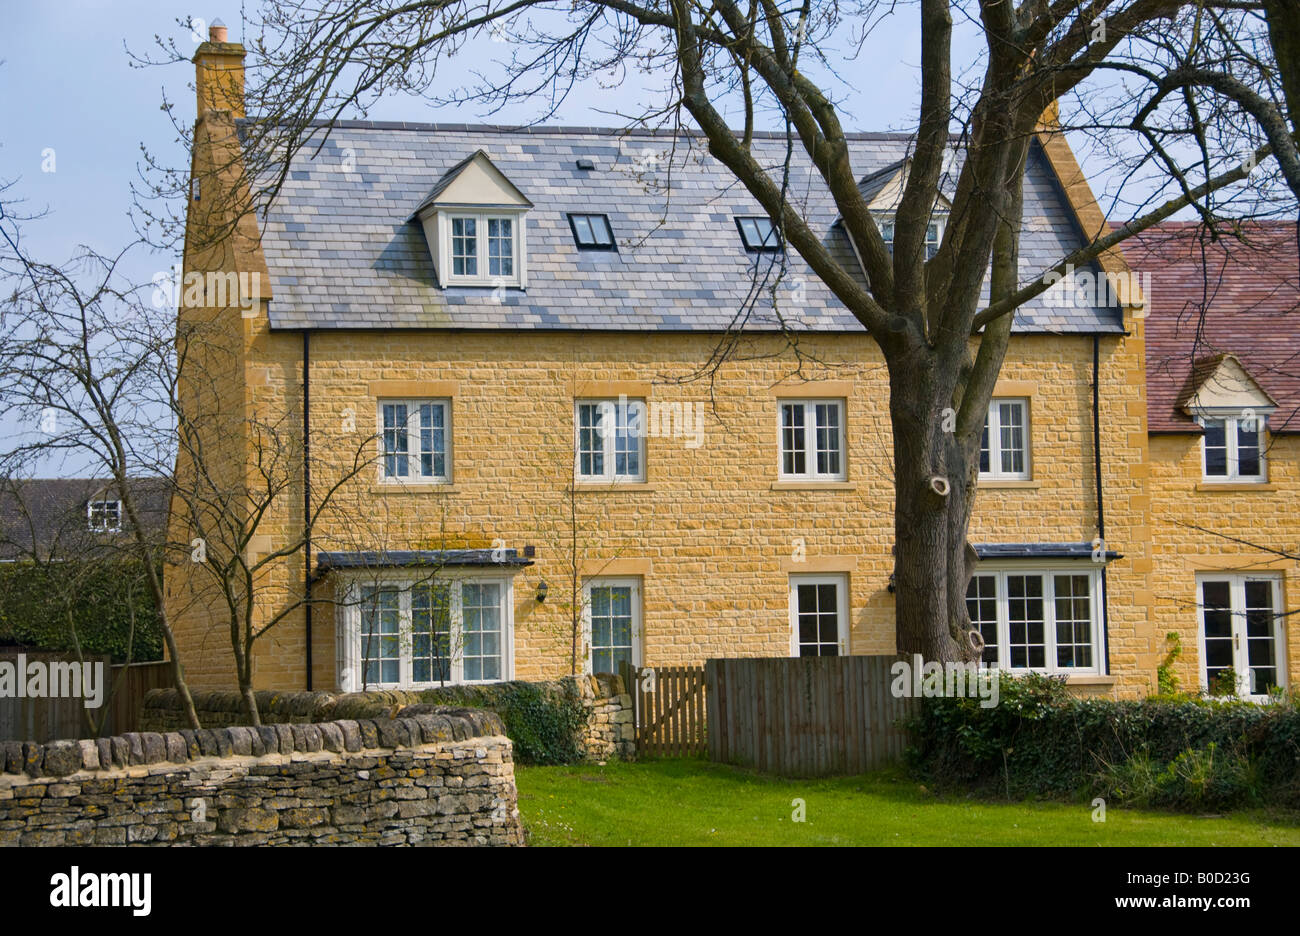 Newly built large detached house in Cotswolds Gloucestershire England UK EU Stock Photo